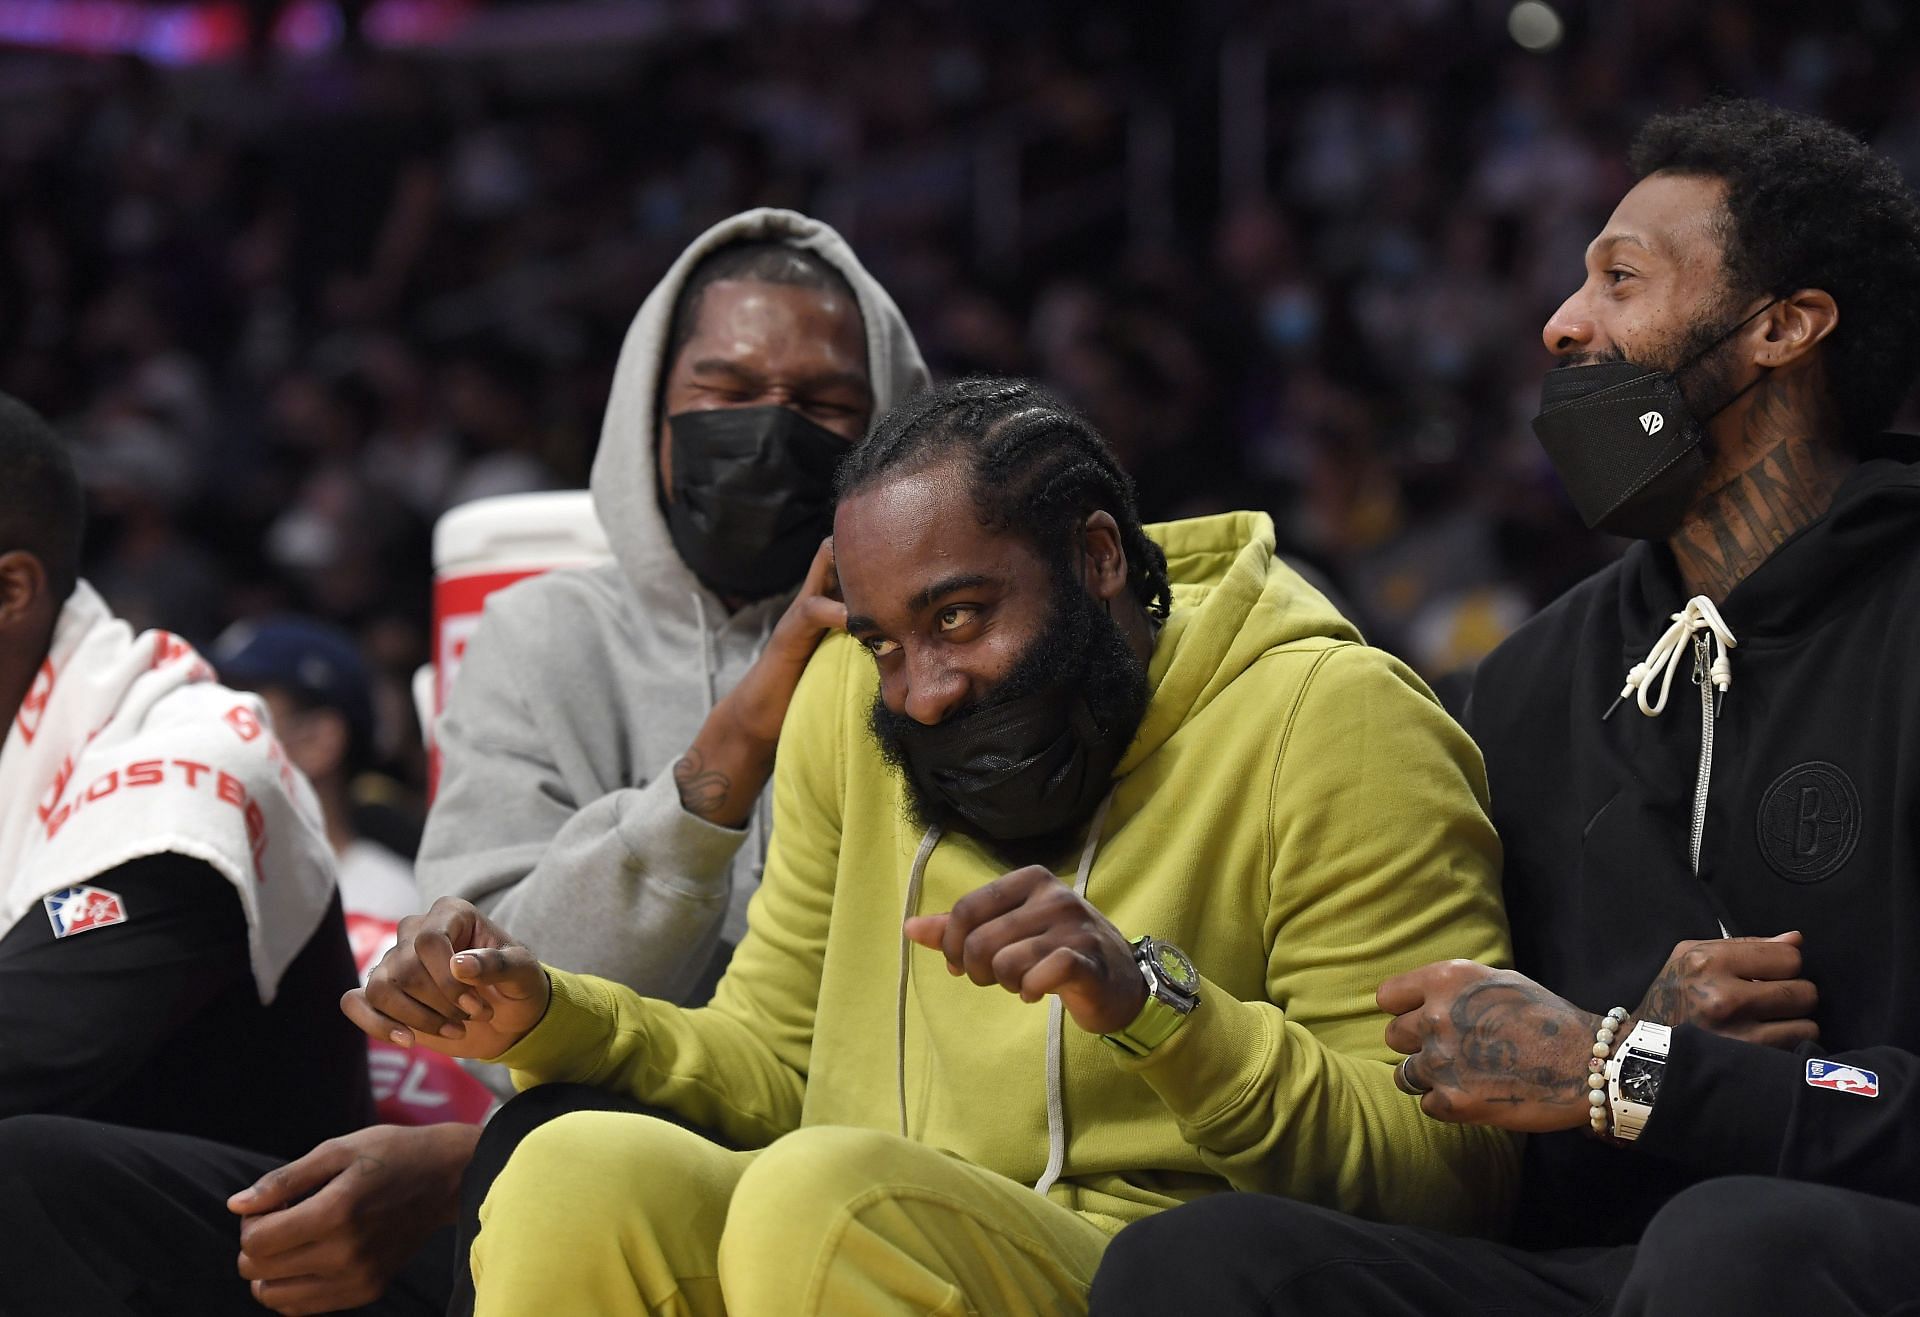 Kevin Durant #7 Kyrie Irving #11 and James Johnson #16 of the Brooklyn Nets laugh on the bench get together during the first half of a preseason game against Los Angeles Lakers at Staples Center on October 3, 2021 in Los Angeles, California.